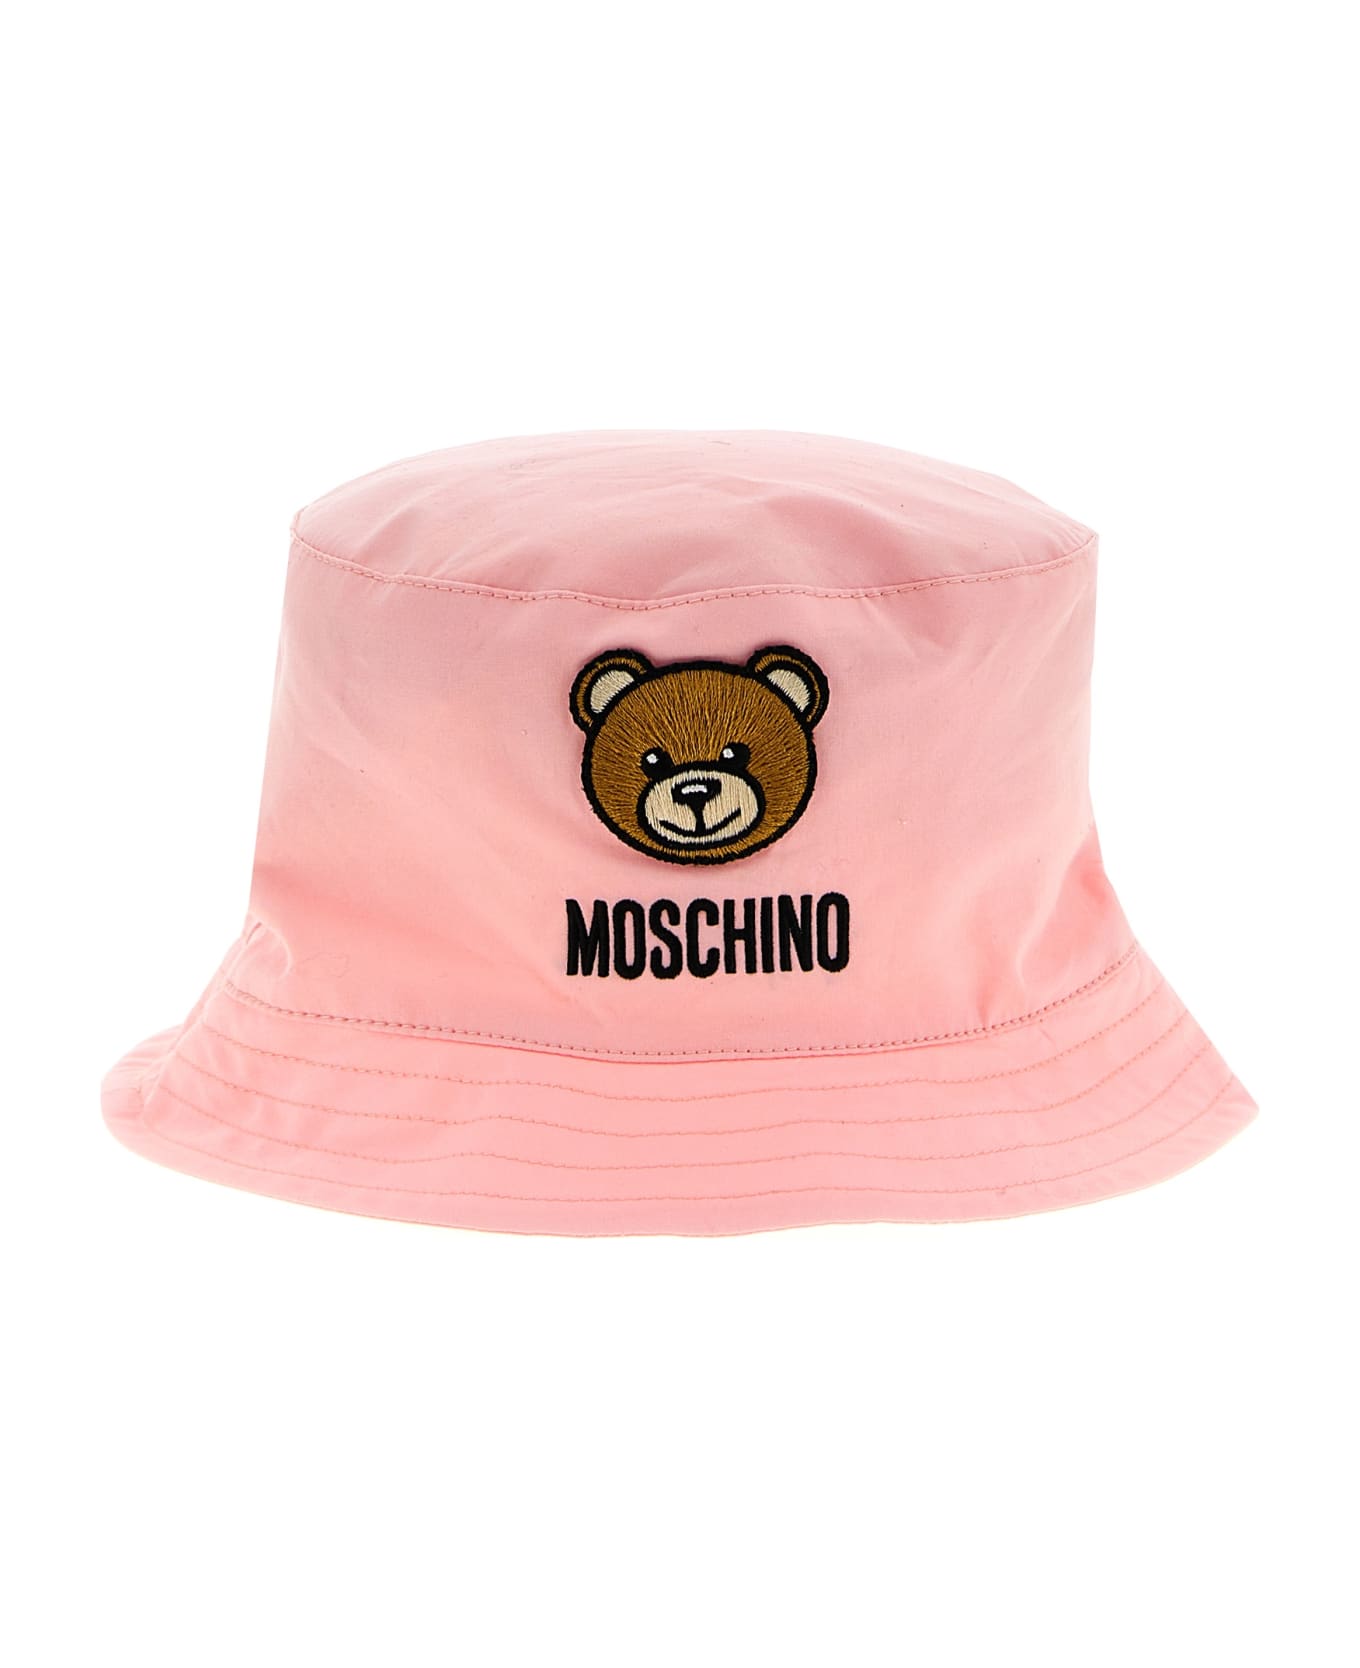 Moschino Logo Embroidery Bucket Hat - Pink